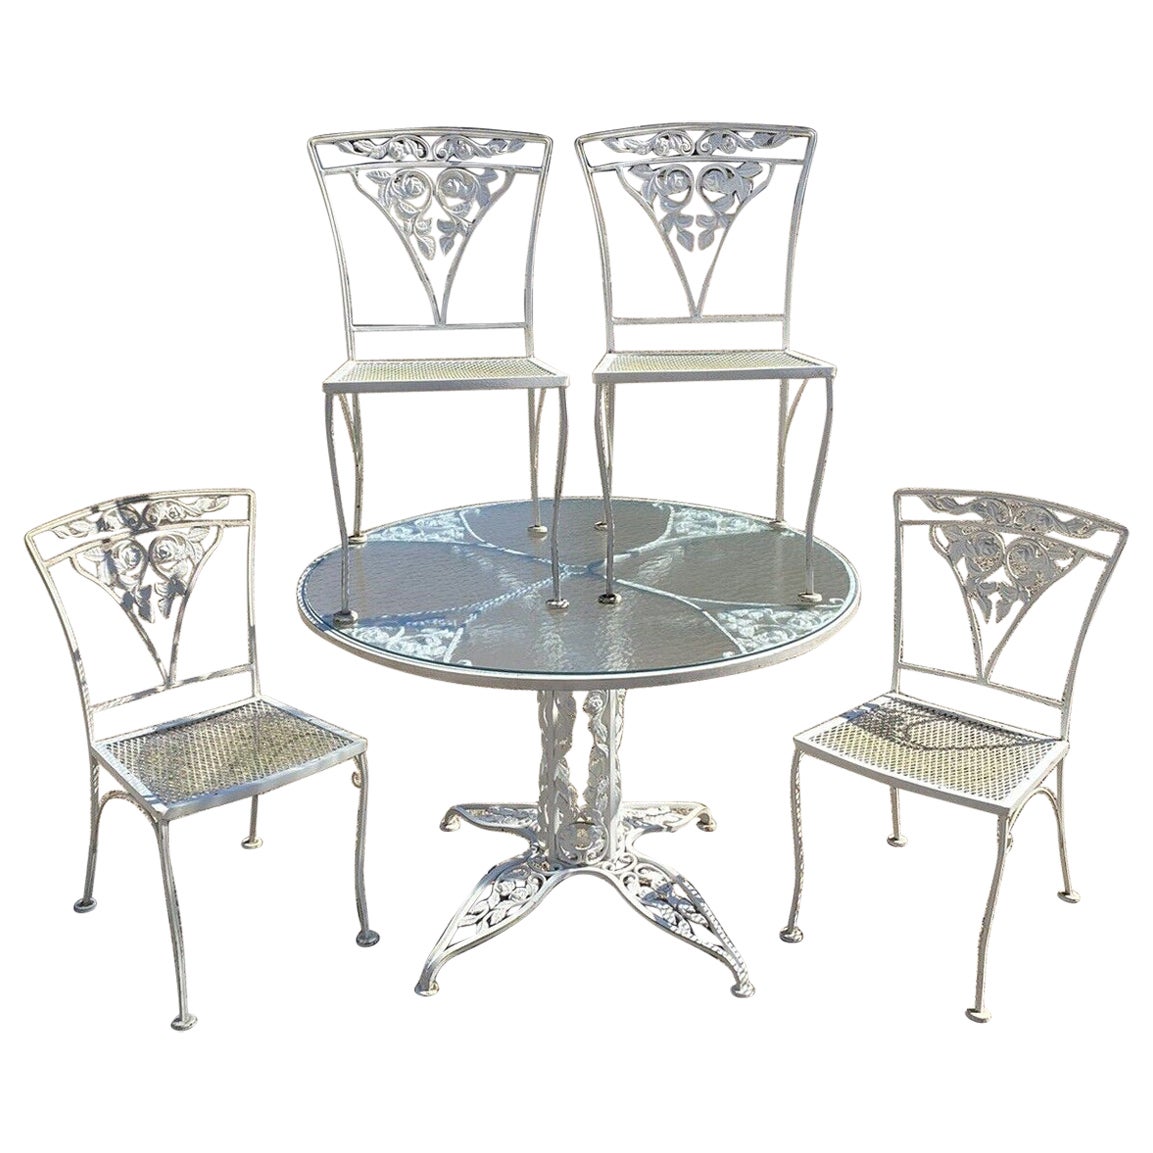 Russell Woodard Orleans Pattern Wrought Iron Patio Garden Dining Set, 5 Pc Set For Sale